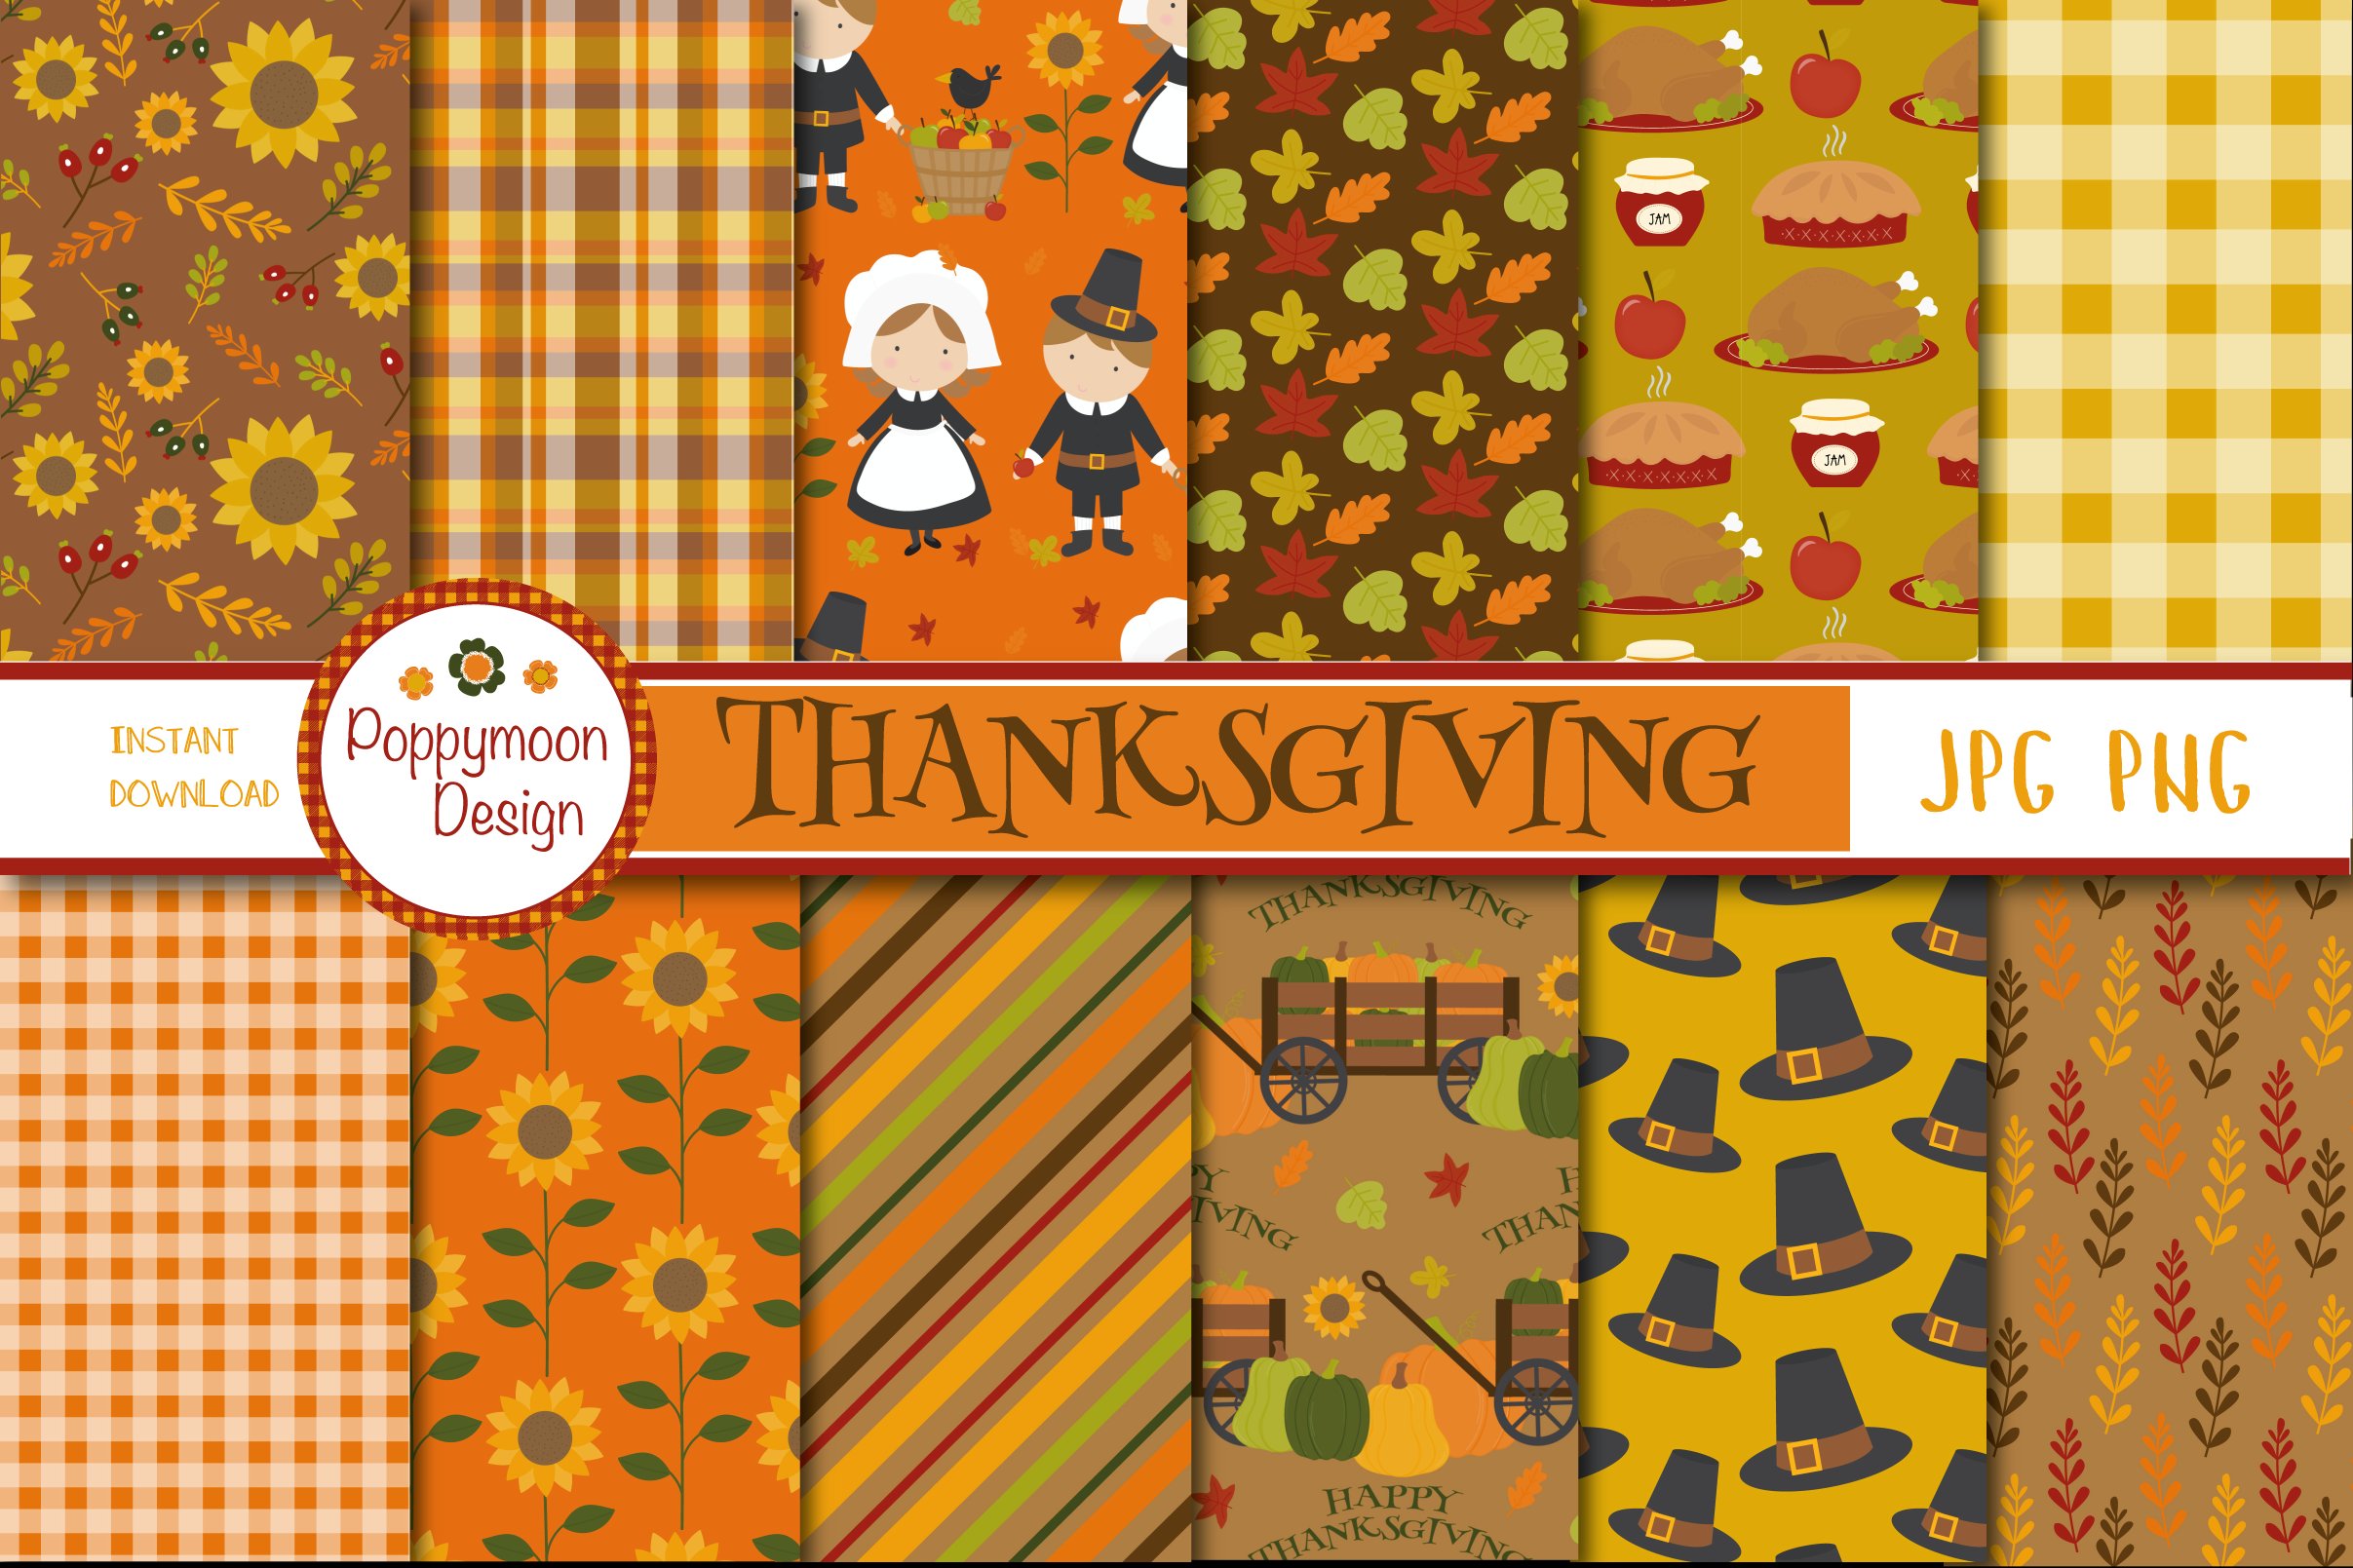 Cool Thanksgiving collection.